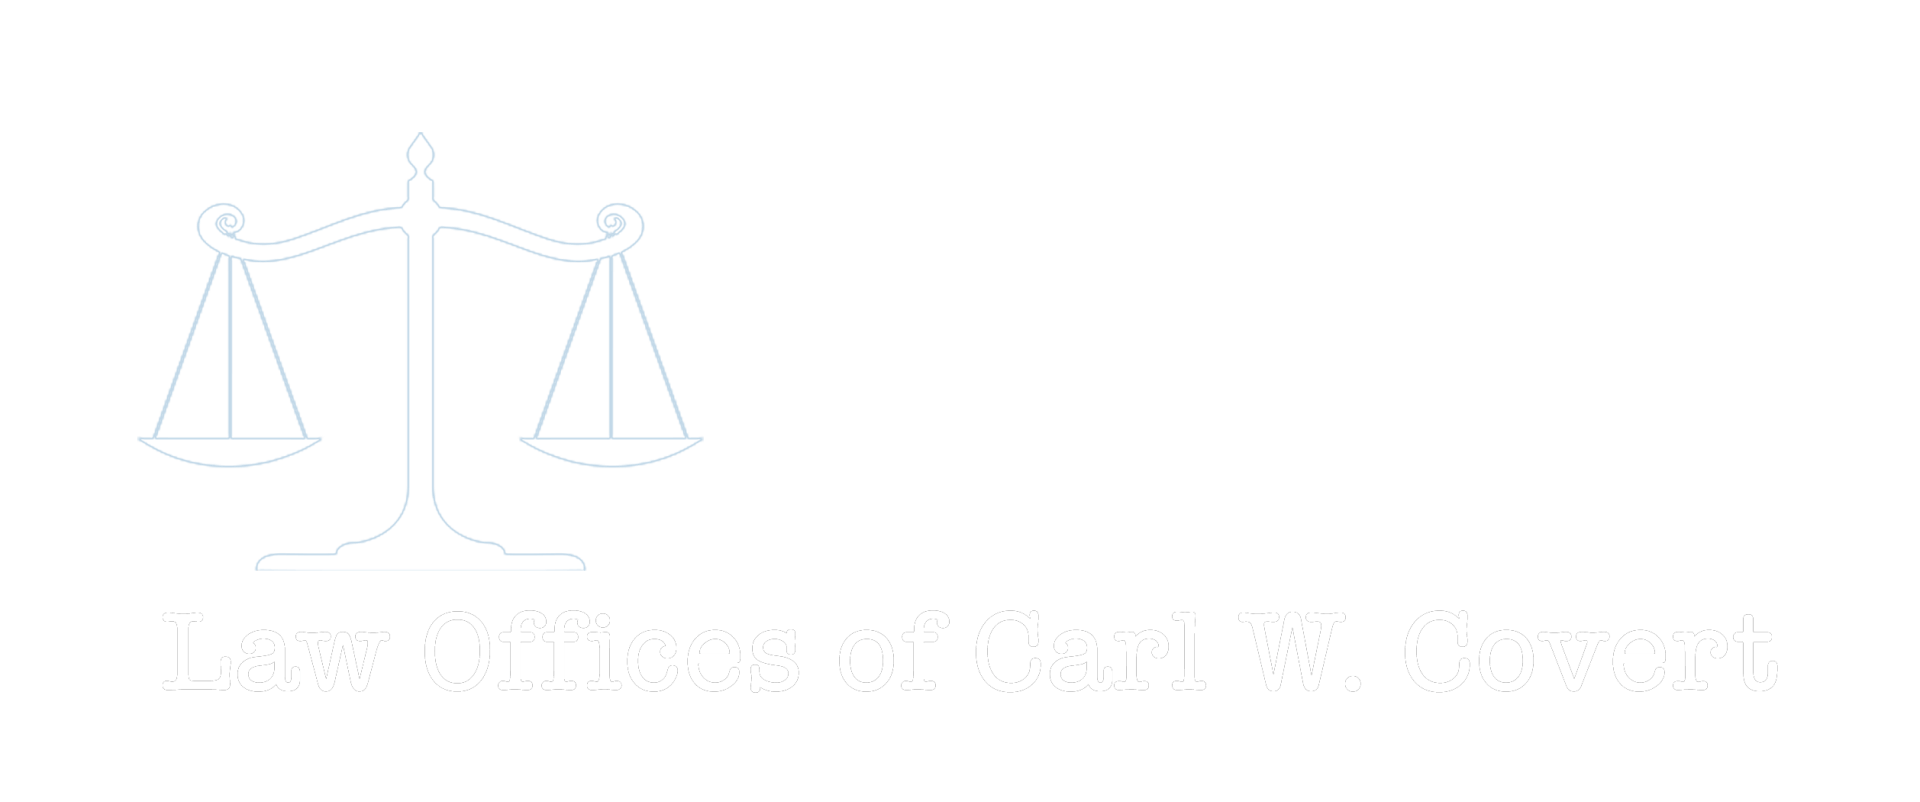 Law Offices of Carl W. Covert